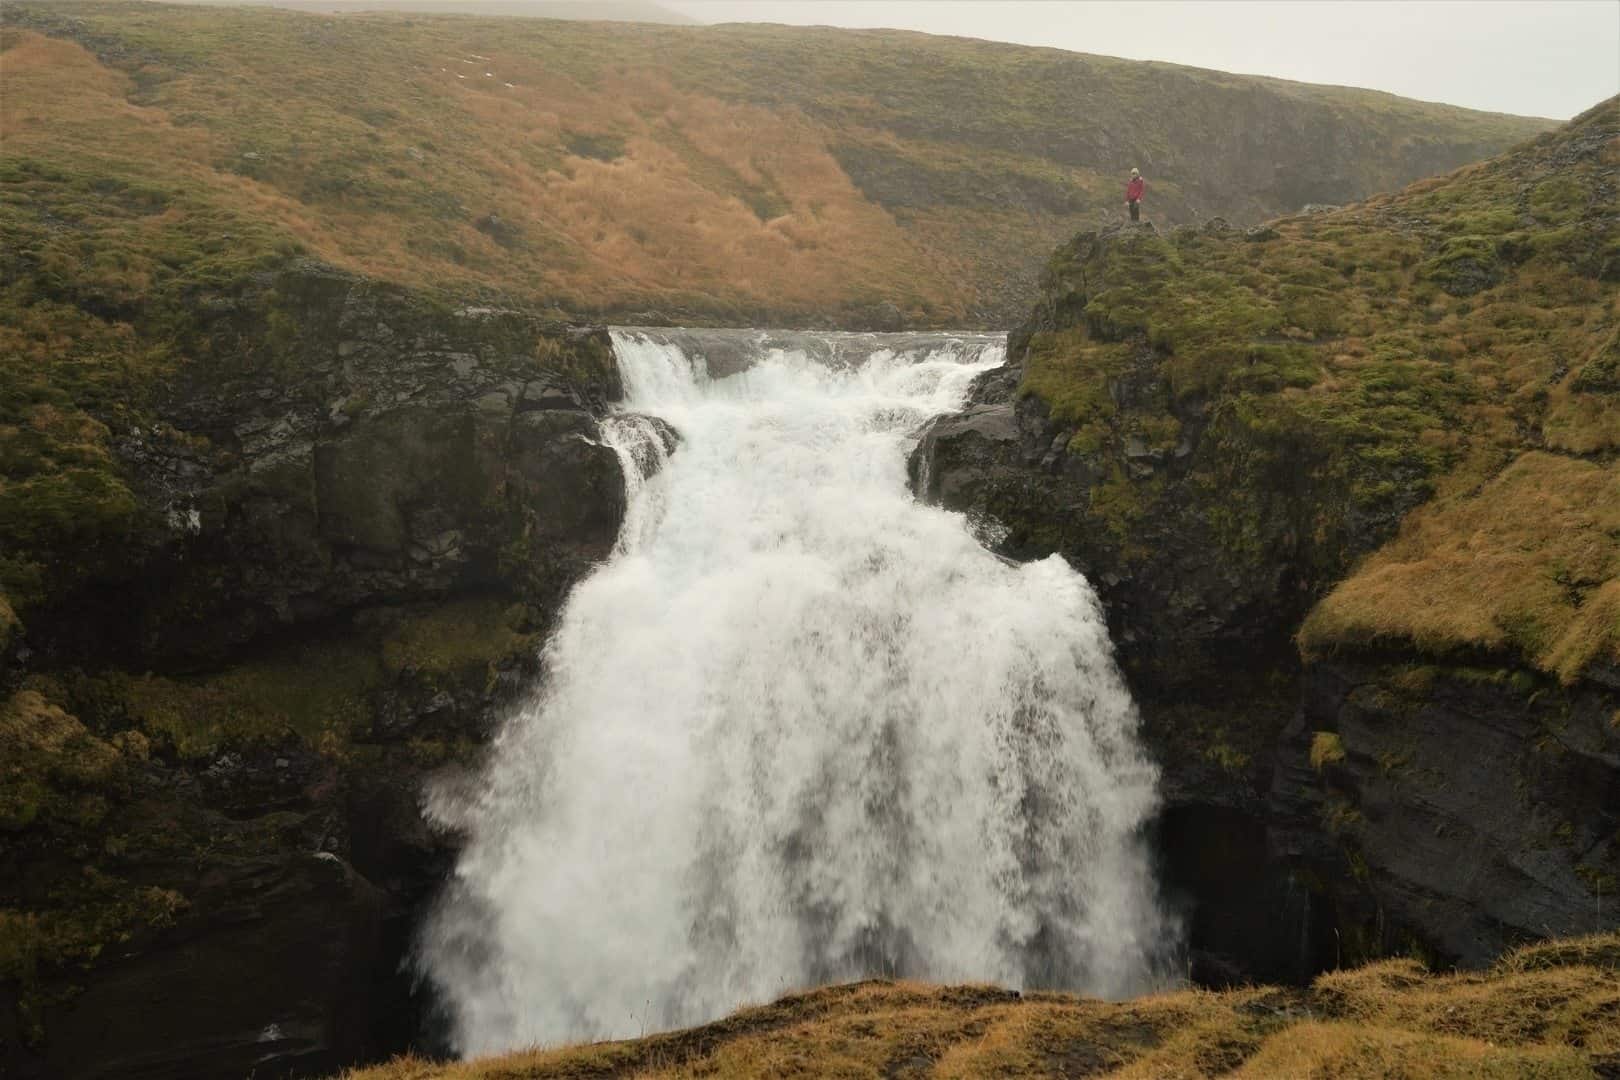 You'll find solitude on the trail above Skógafoss